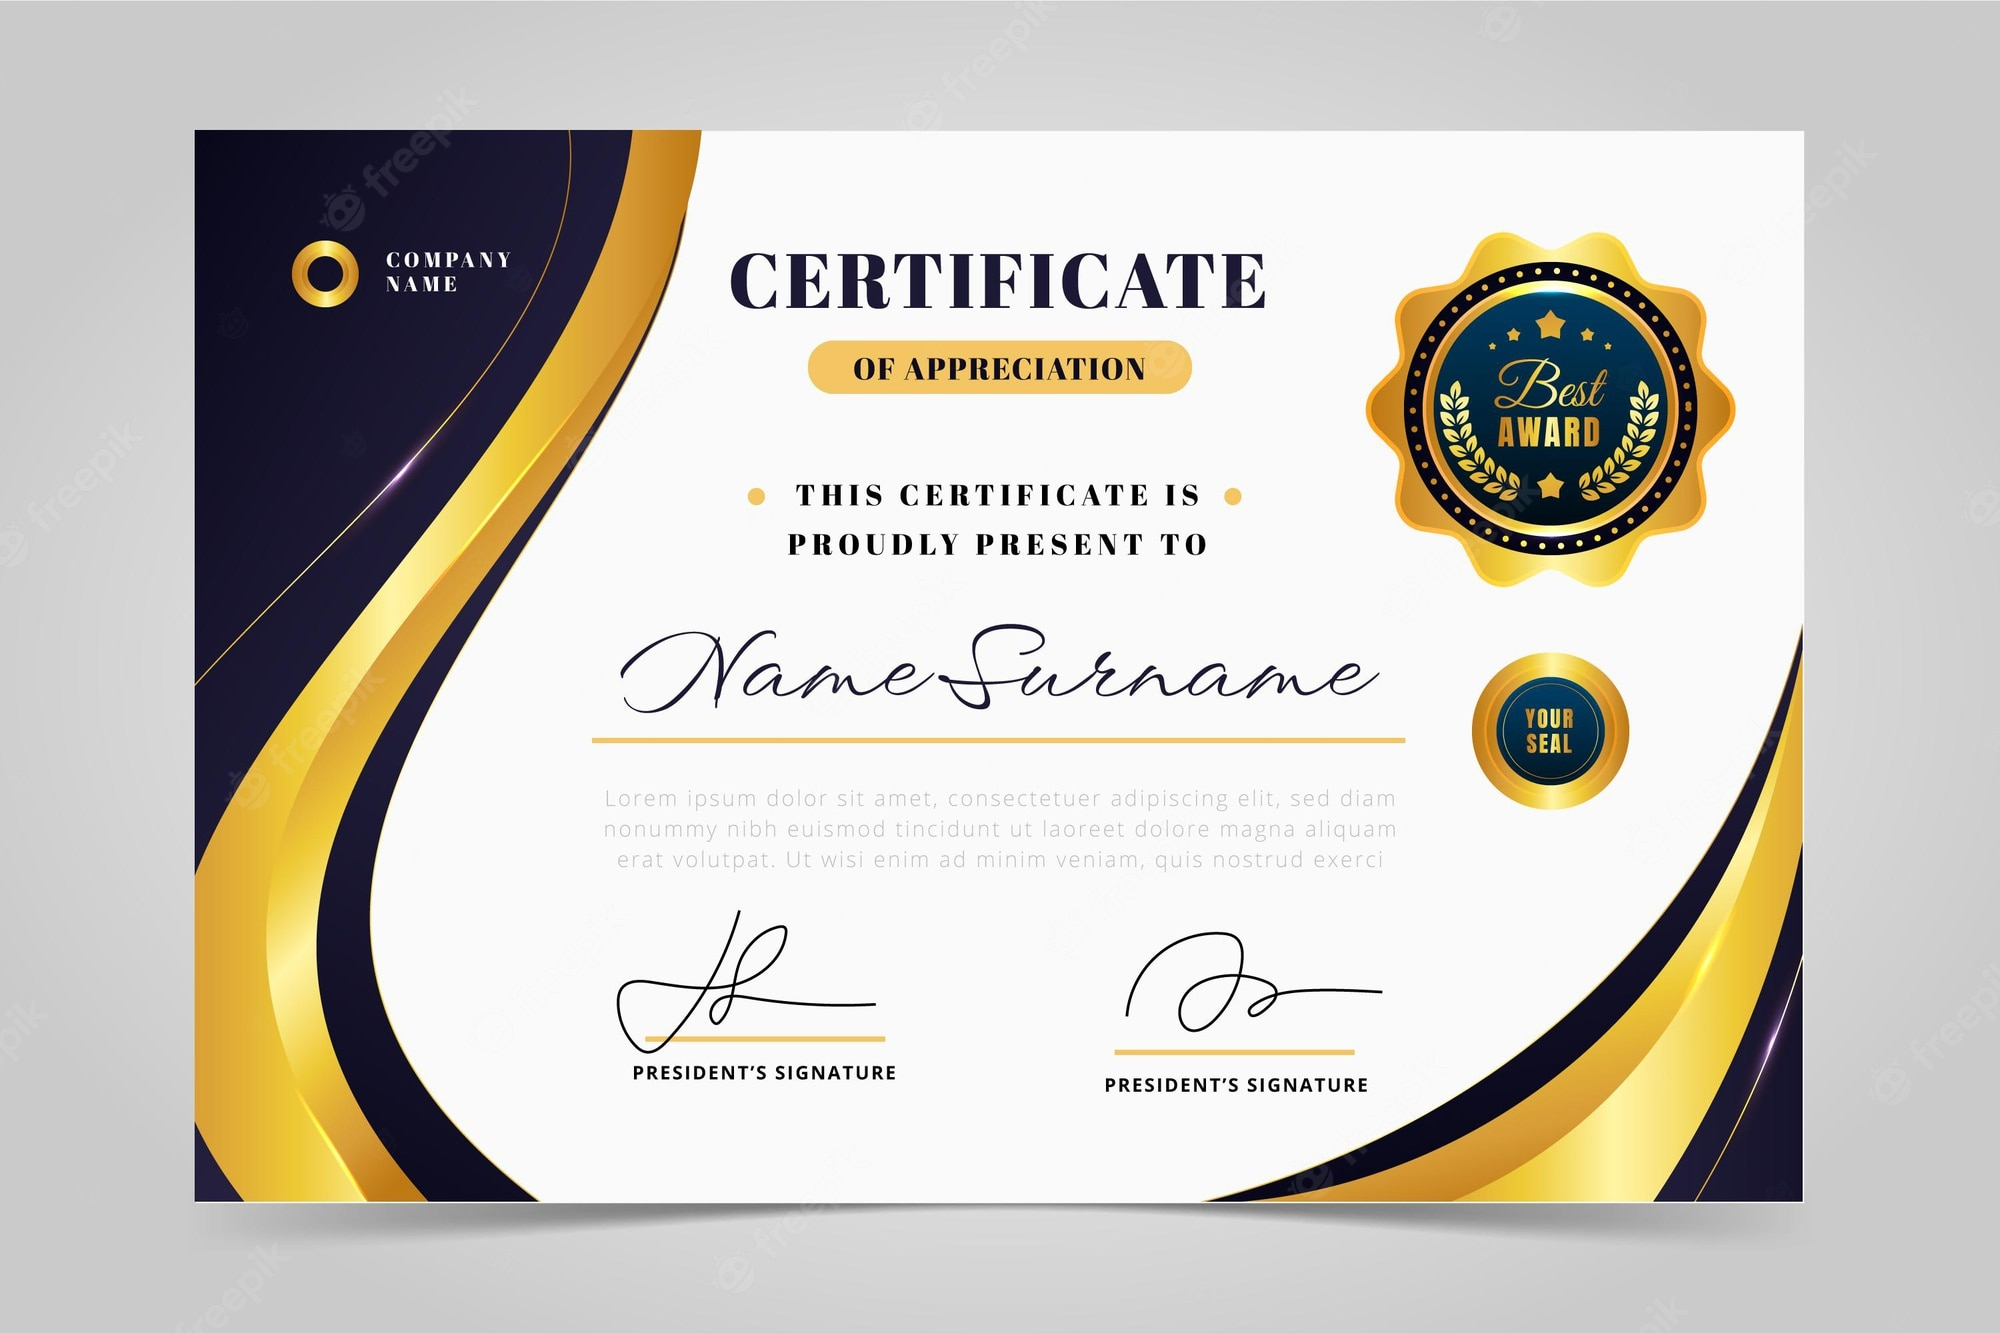 Employee certificate Images  Free Vectors, Stock Photos & PSD